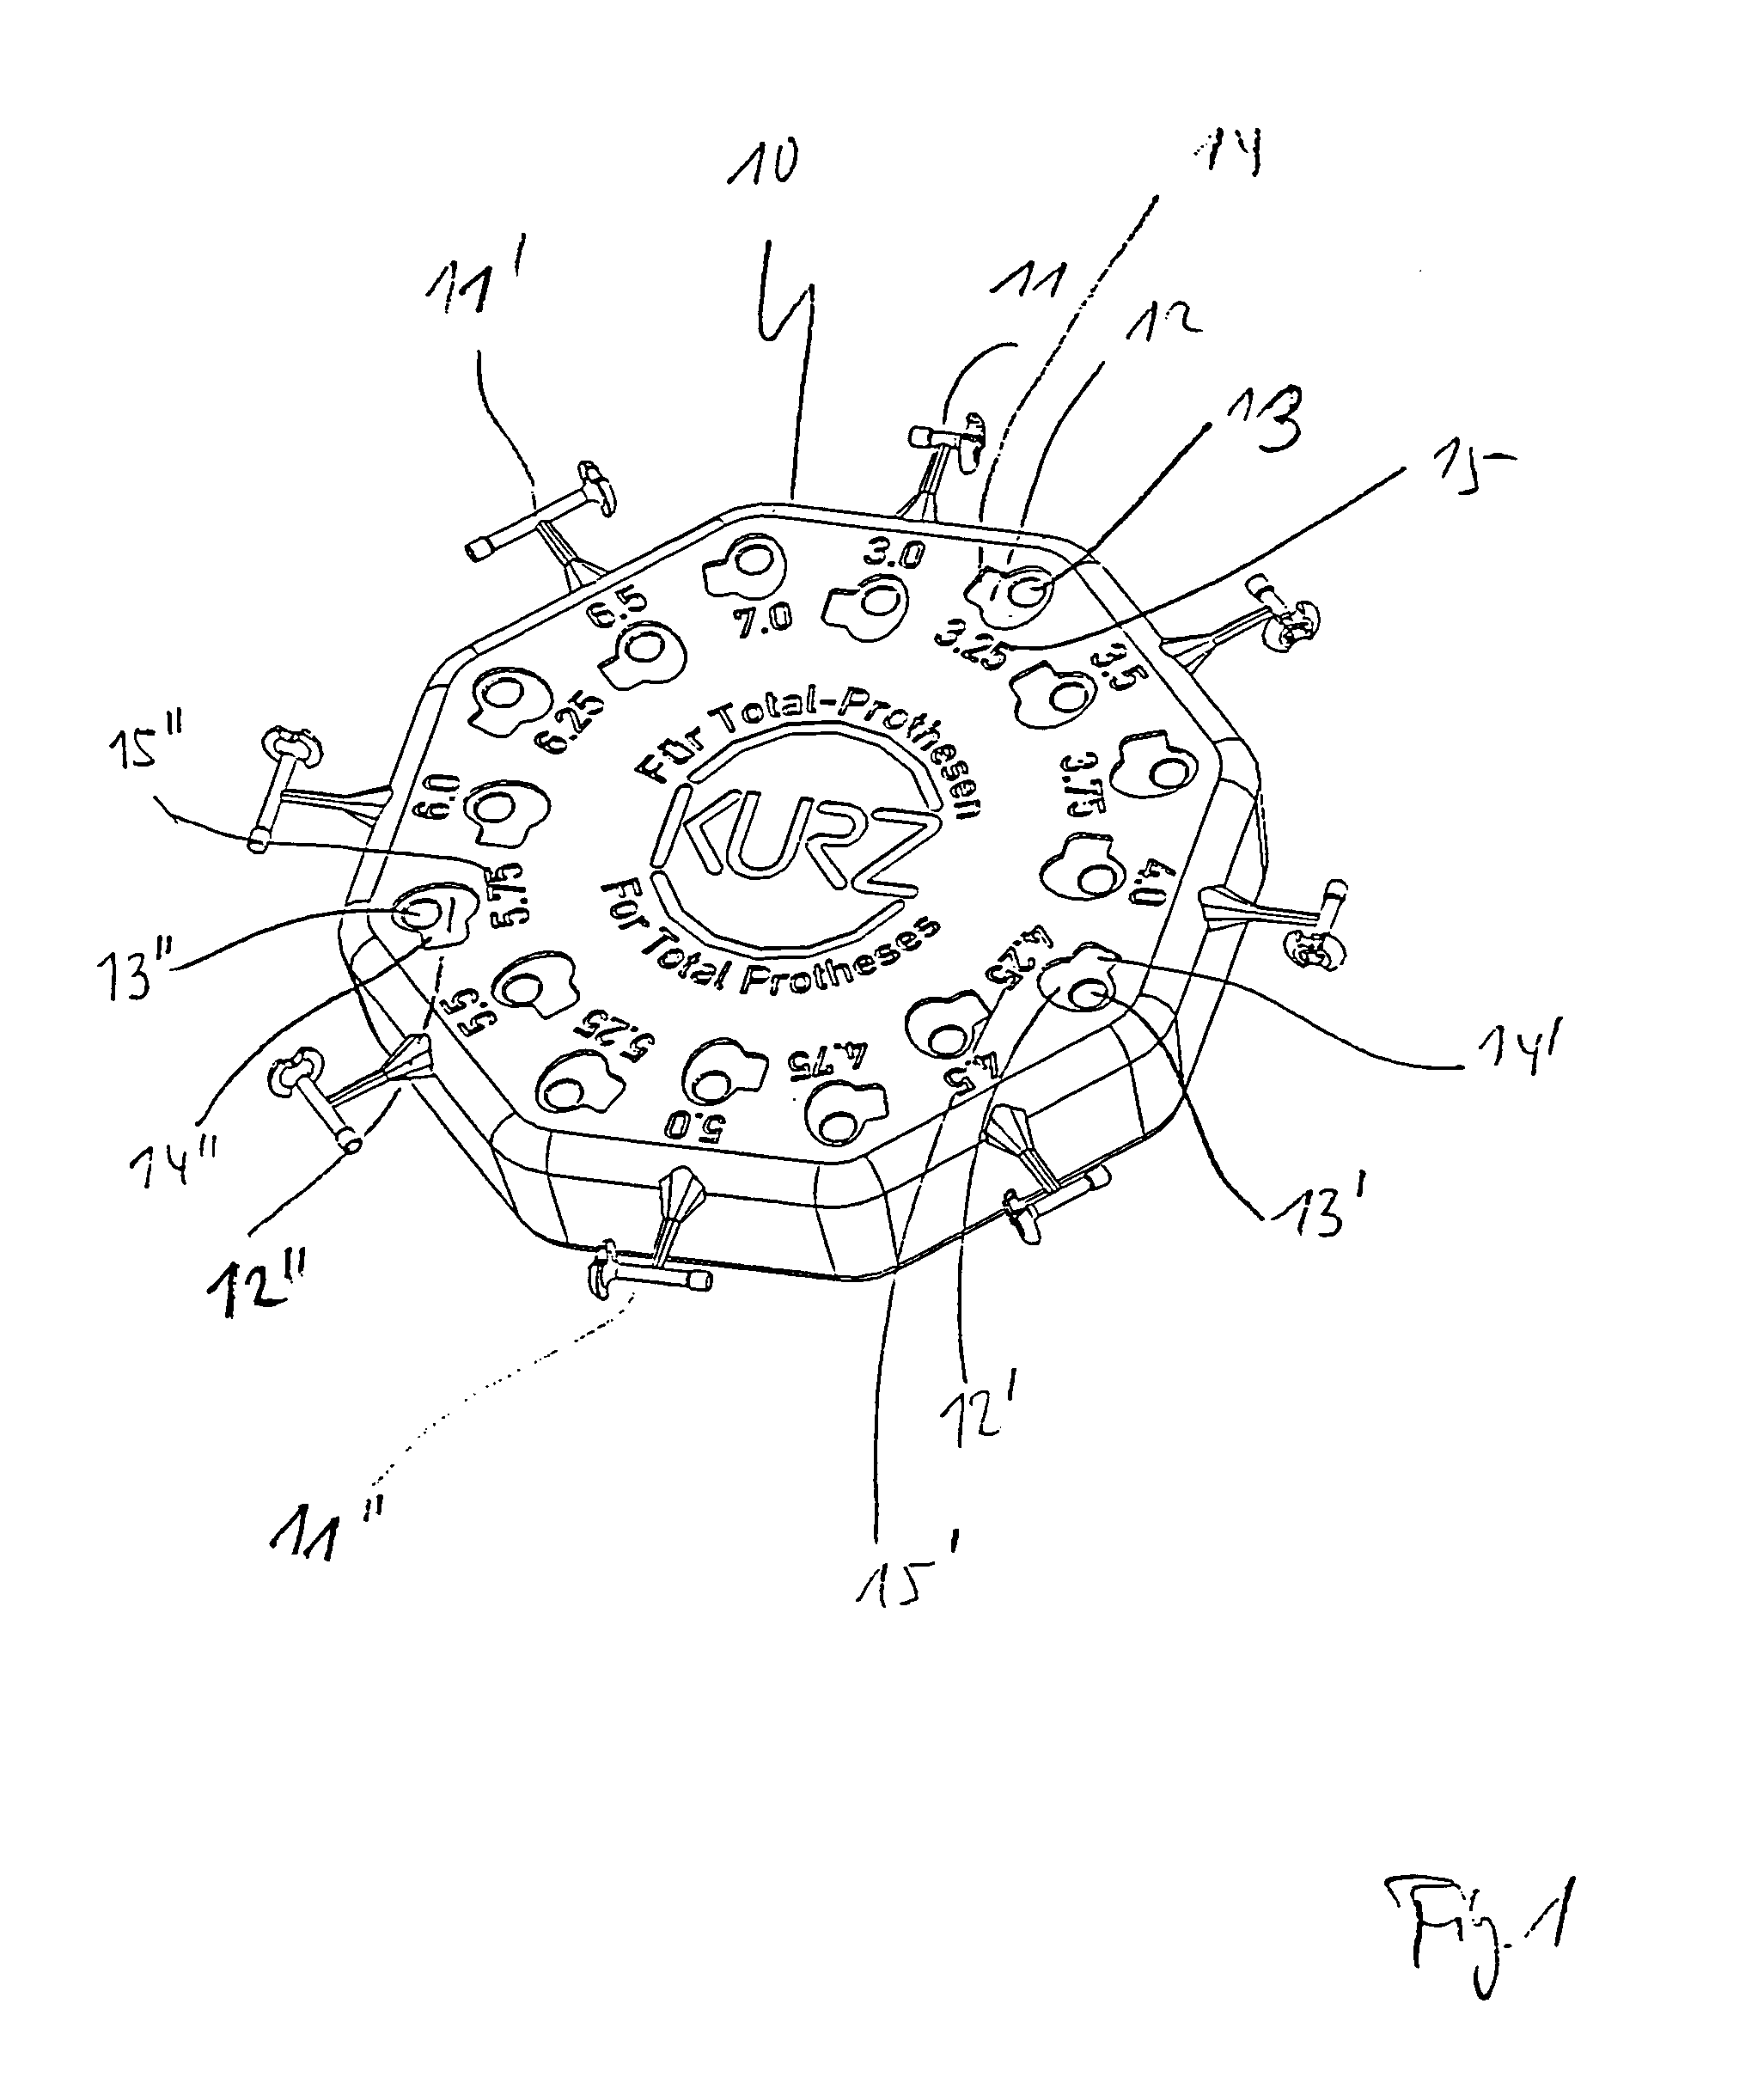 Device for adjusting the length of middle ear implants